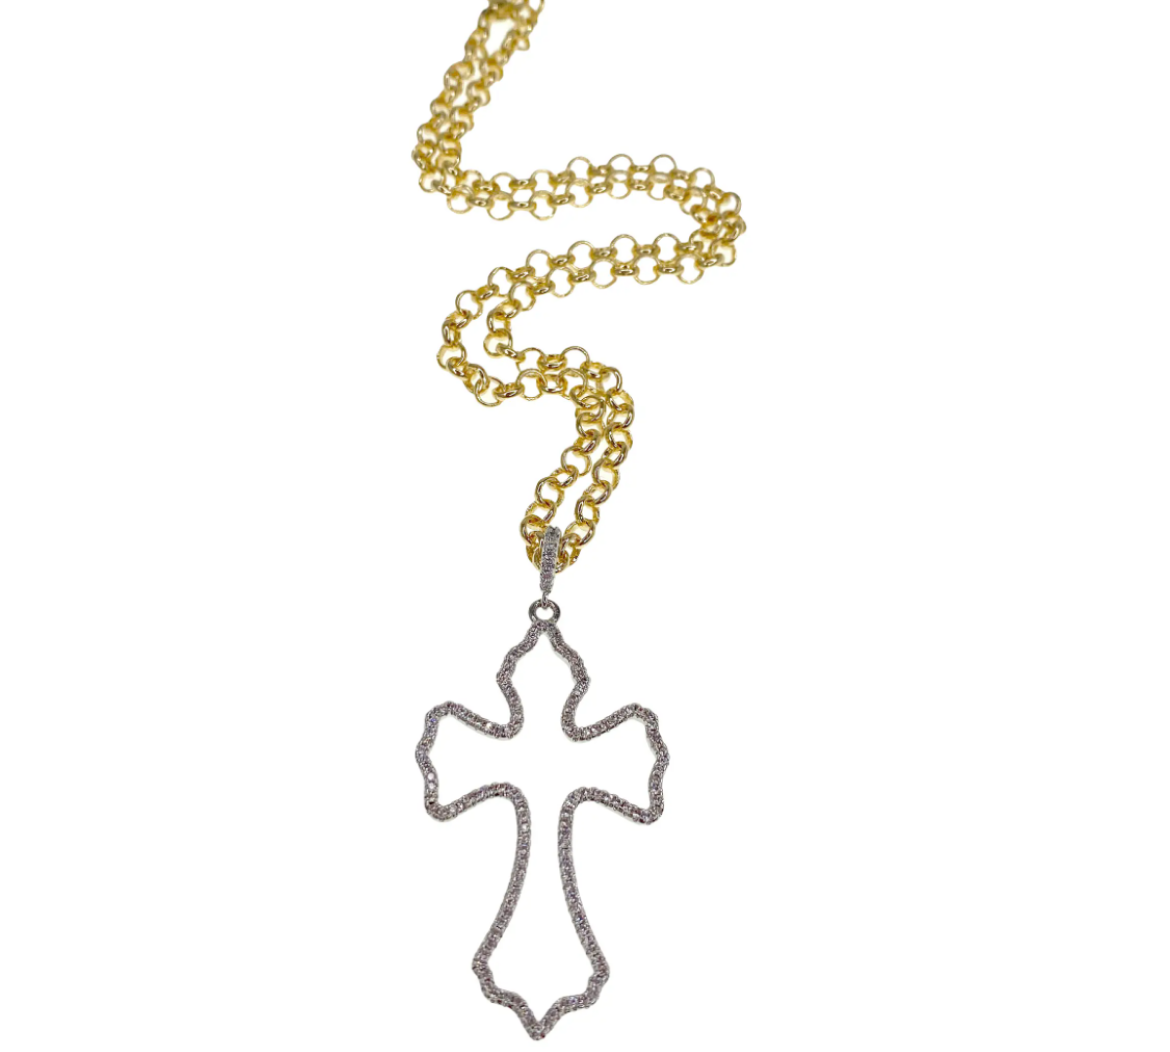 Outlined Cross Necklace